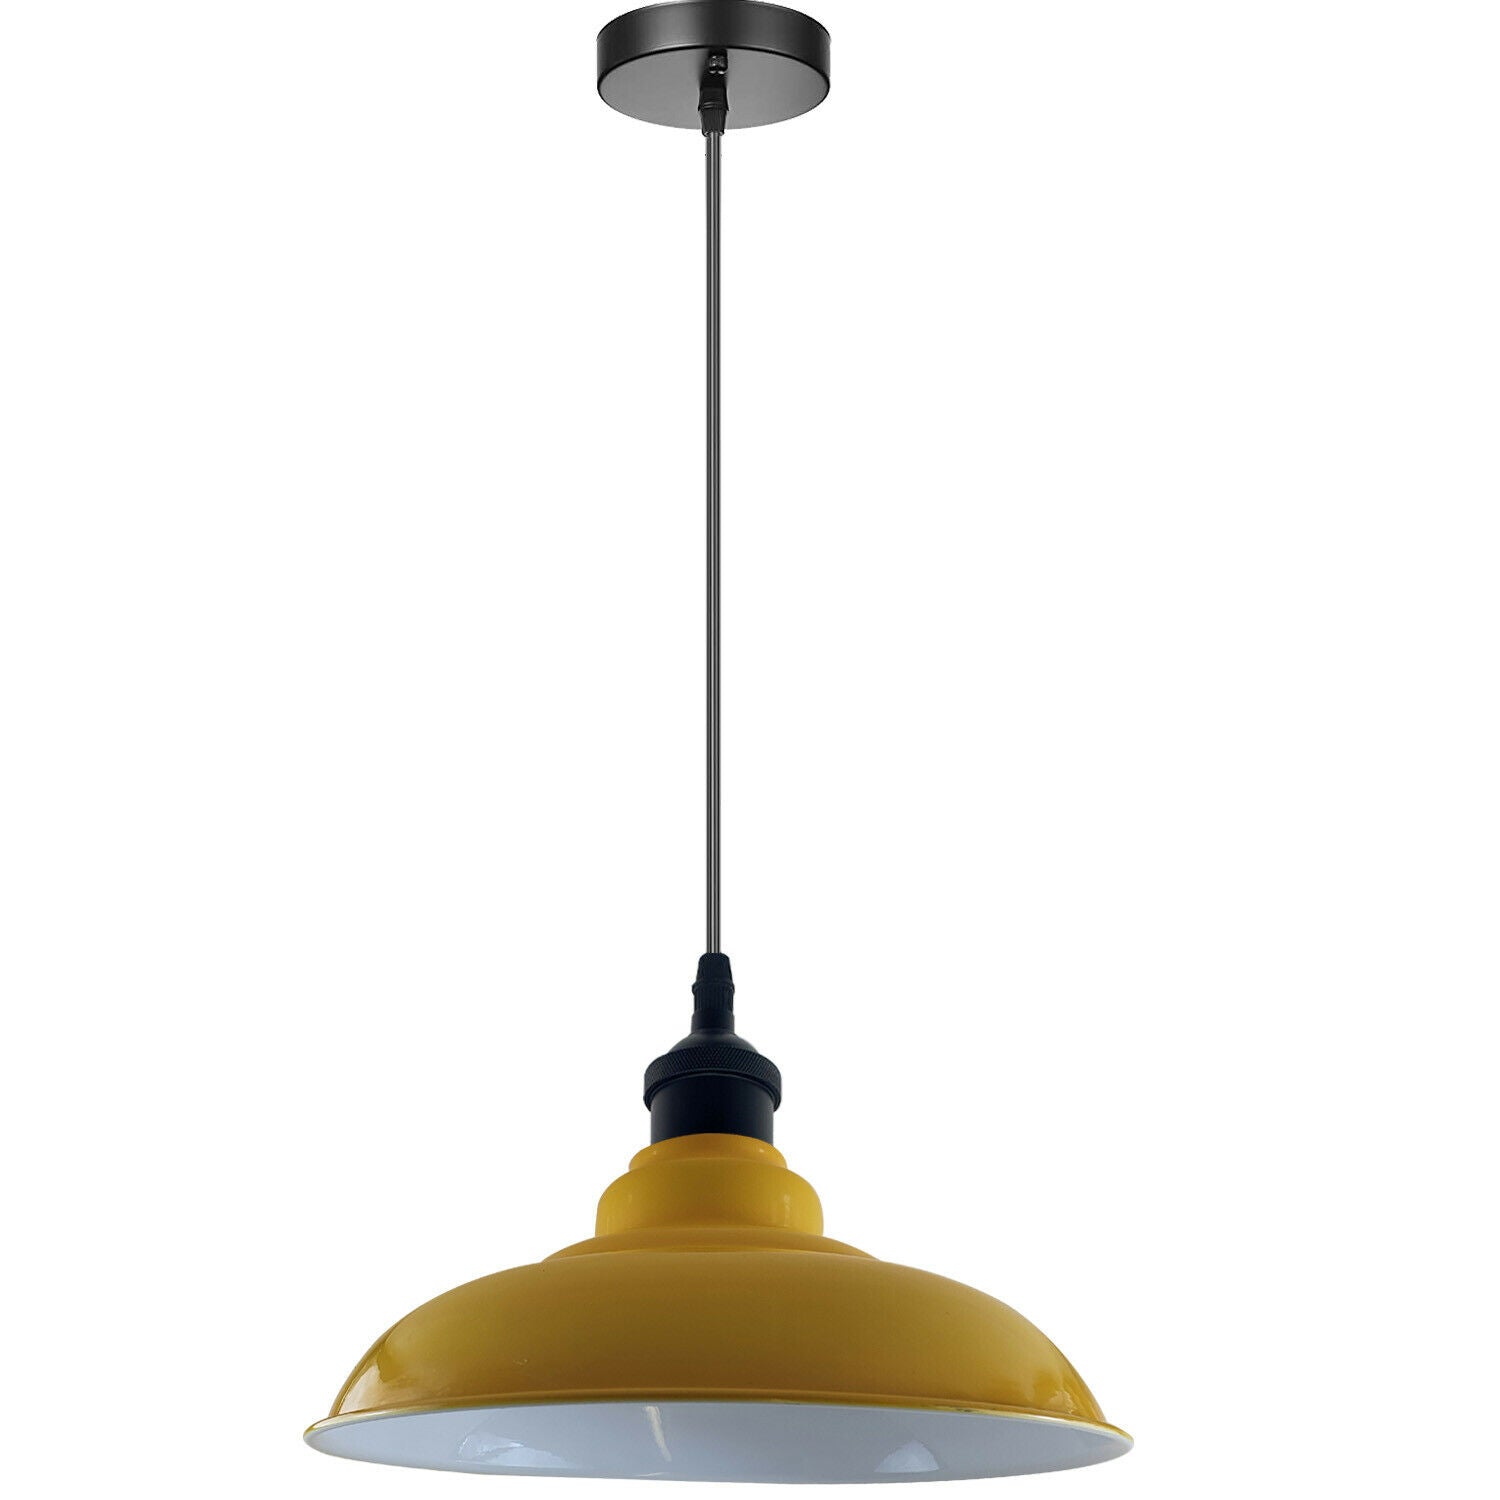 Yellow metal pendant lamp shade in an antique style, perfect for a dining room.